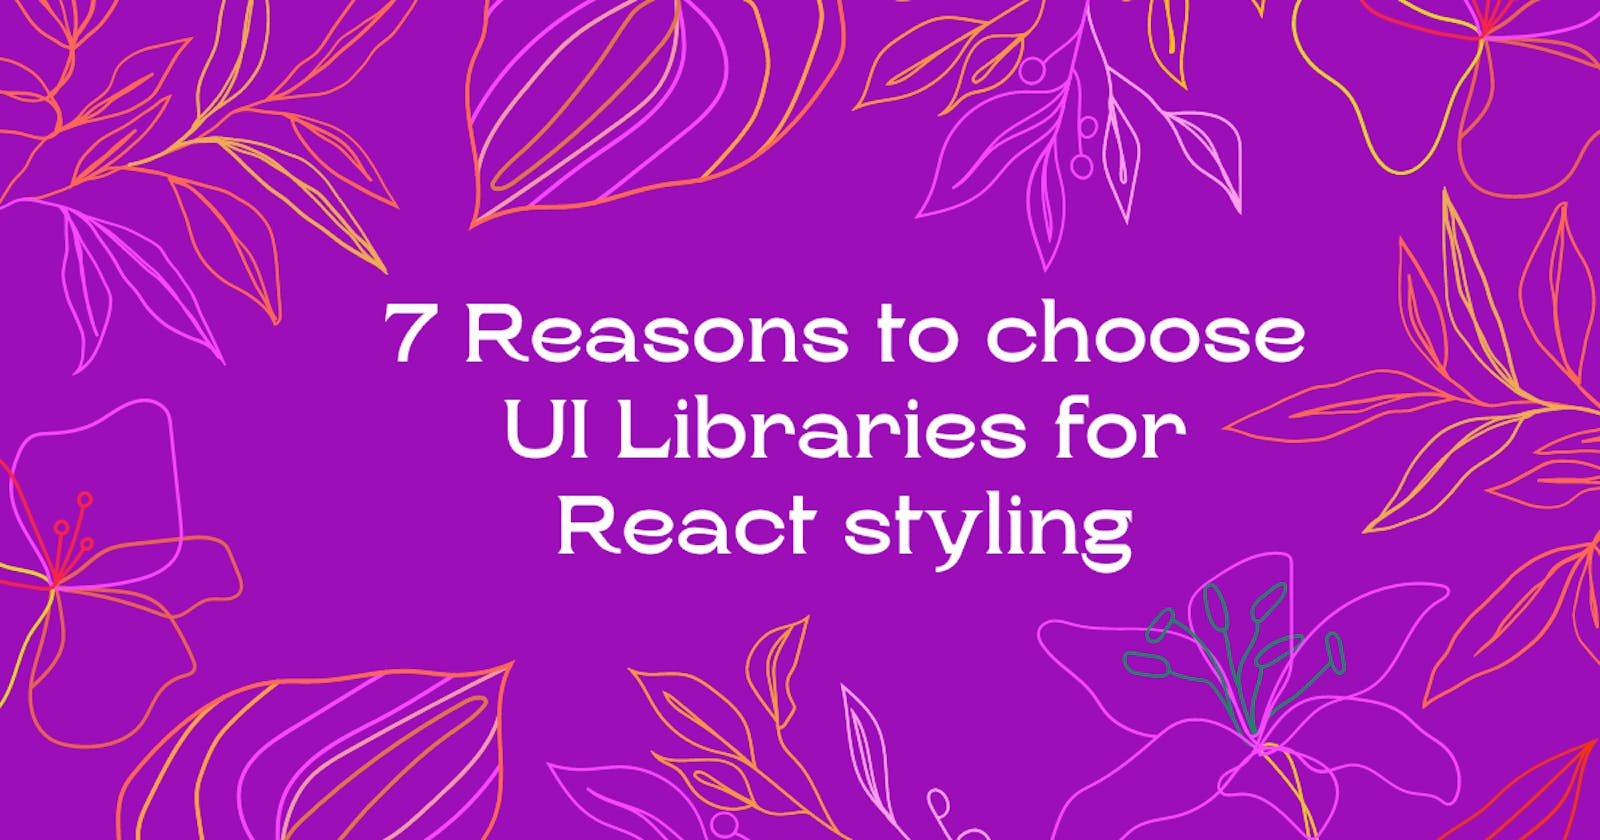 7 Reasons to Choose UI Libraries for React Styling